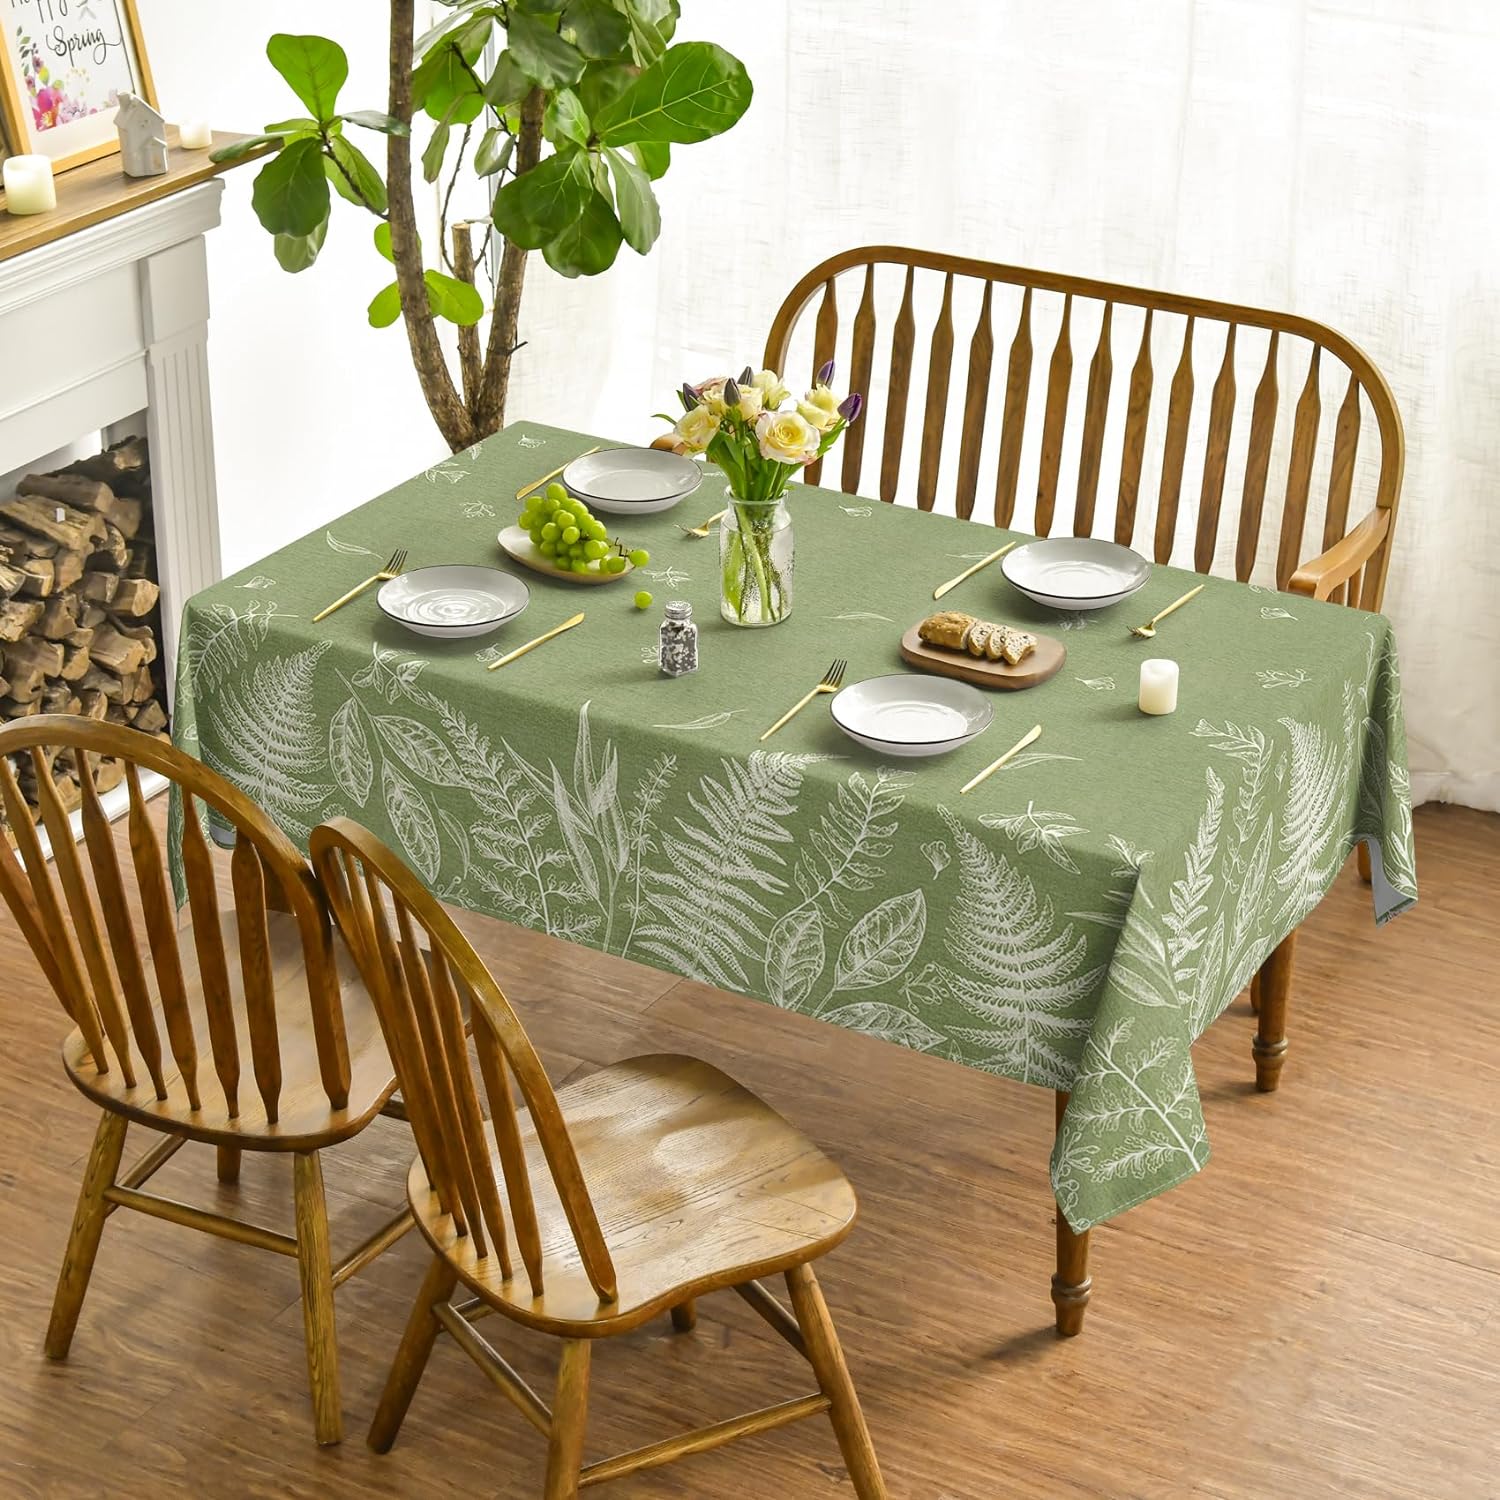 Bulk Spring Fern Tablecloth 60×84 Inch Rectangular Green Plants Washable Cover for Party Picnic Decor Wholesale